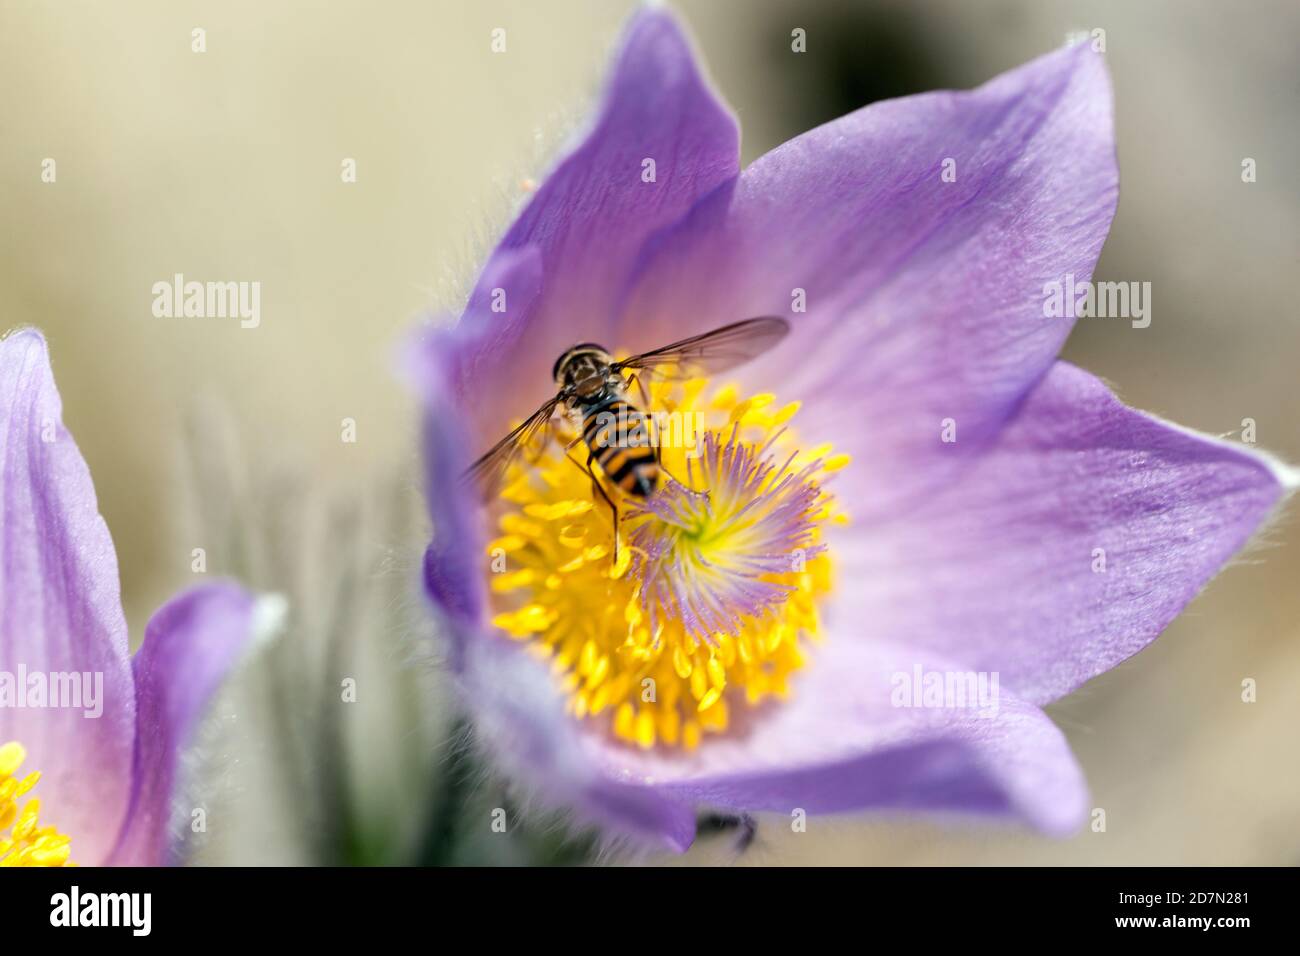 Hoverfly Pasque flower Spring Pollen Hoverfly flower Insect Hoverfly on Flower Pulsatilla vulgaris Early Spring Bloom Pasque flower April flower Stock Photo